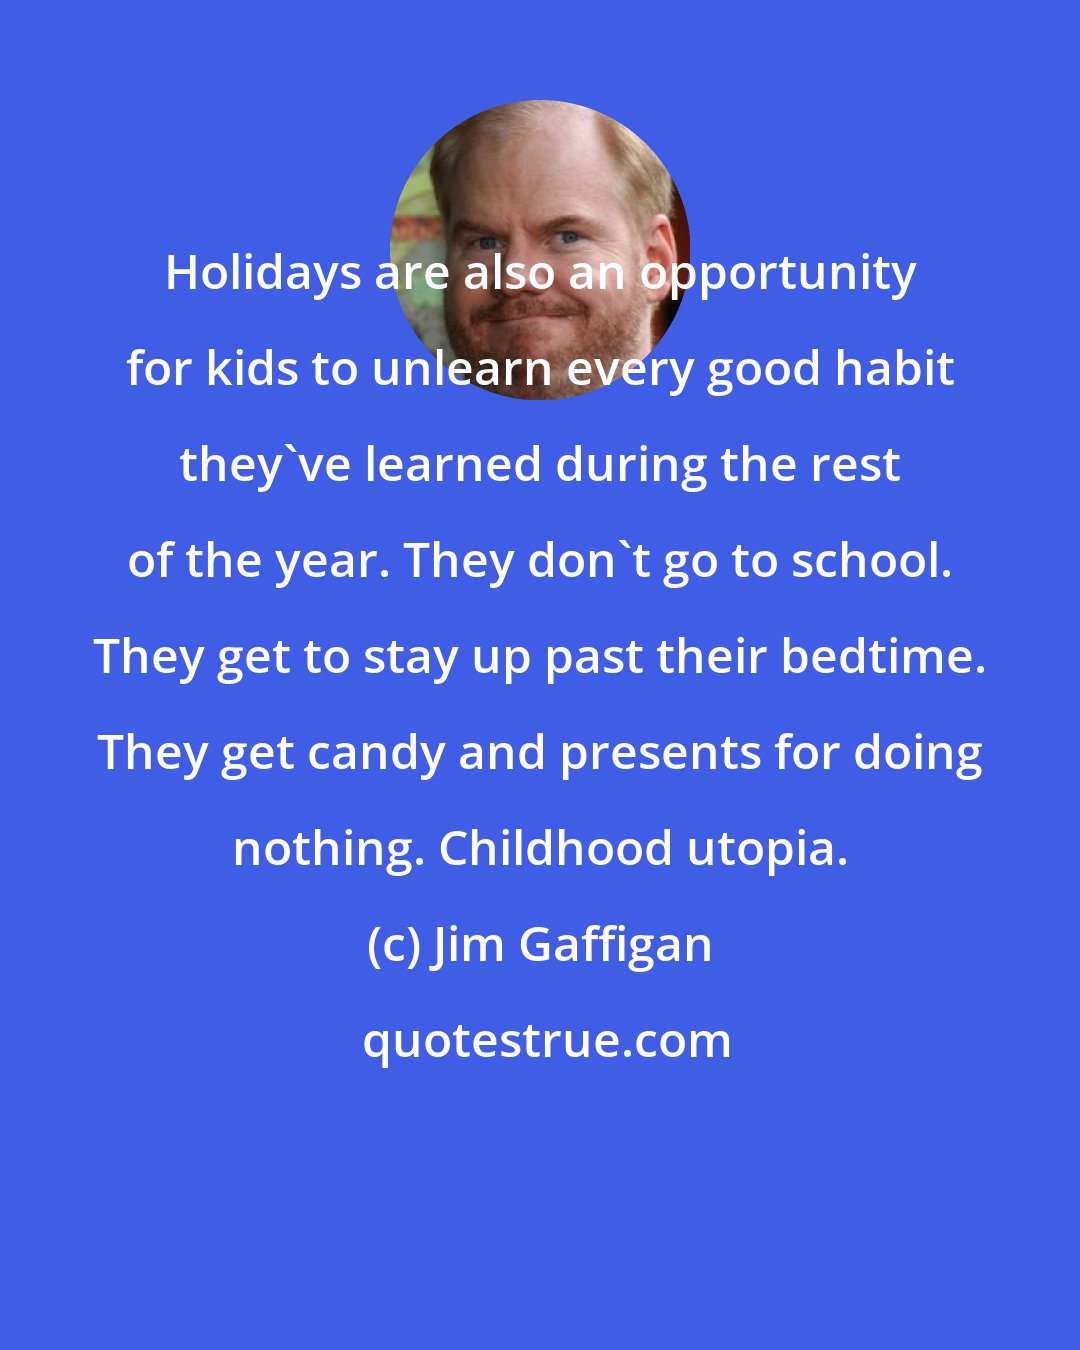 Jim Gaffigan: Holidays are also an opportunity for kids to unlearn every good habit they've learned during the rest of the year. They don't go to school. They get to stay up past their bedtime. They get candy and presents for doing nothing. Childhood utopia.